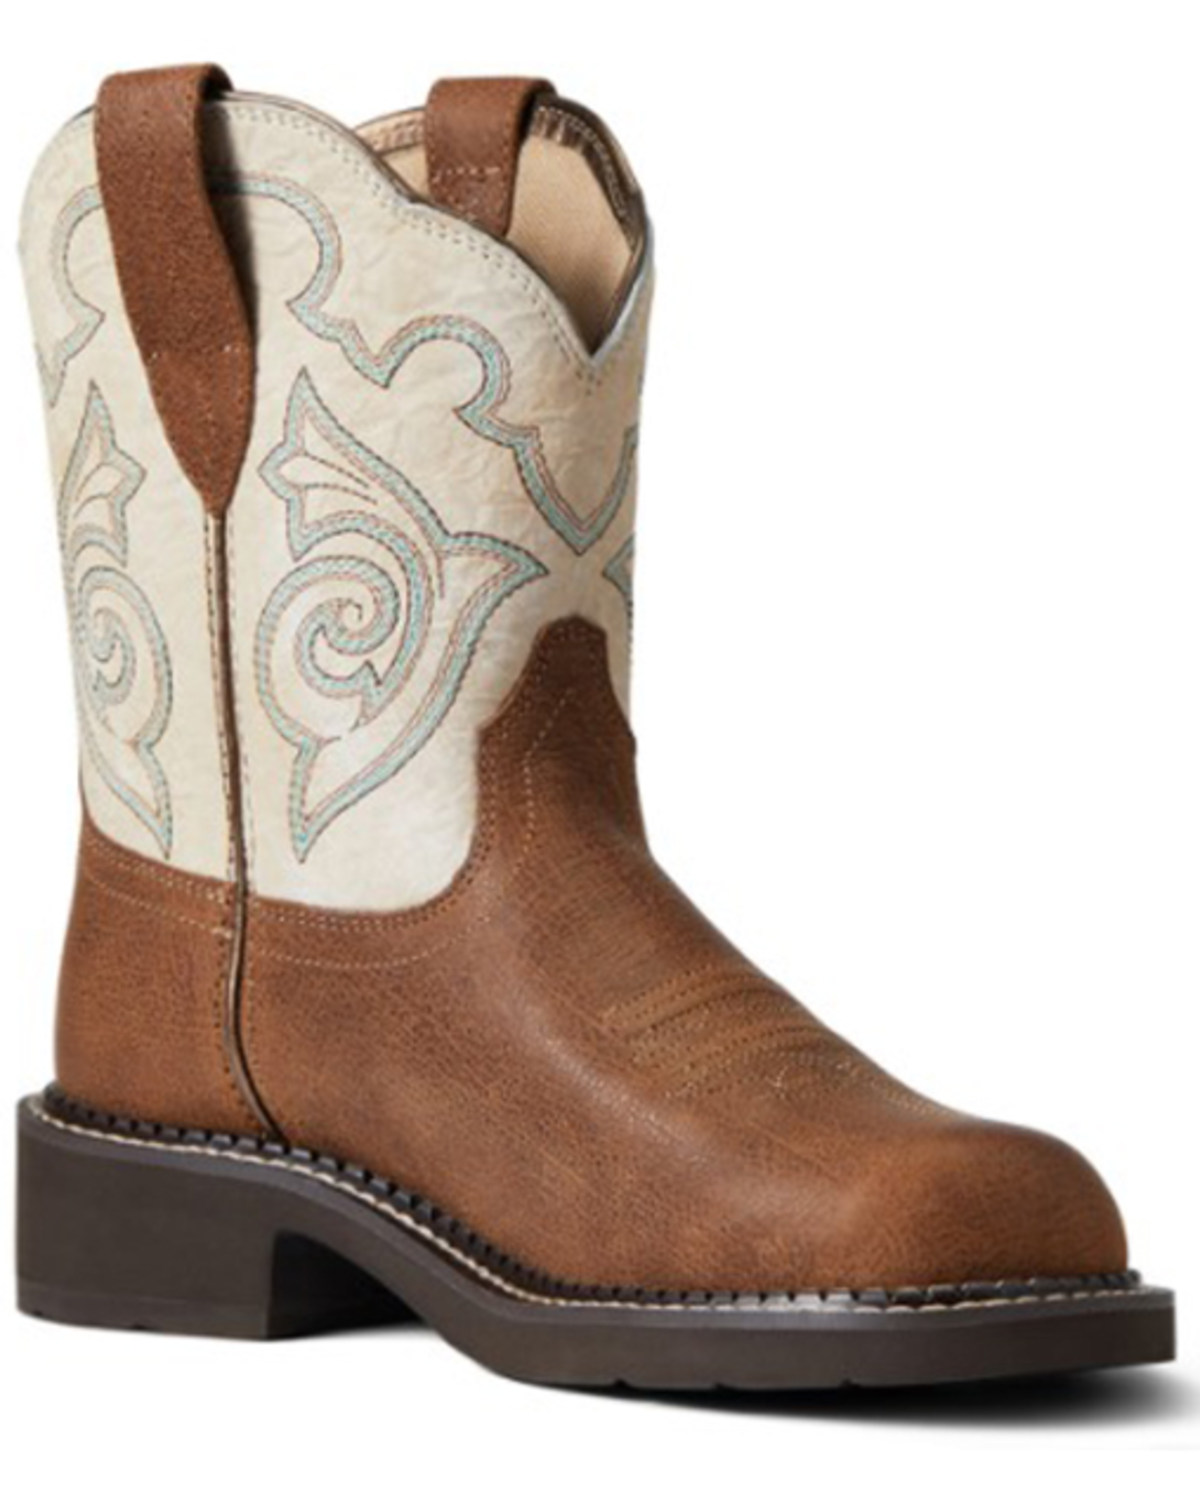 Ariat Women's Heritage Tess Western Boots - Round Toe